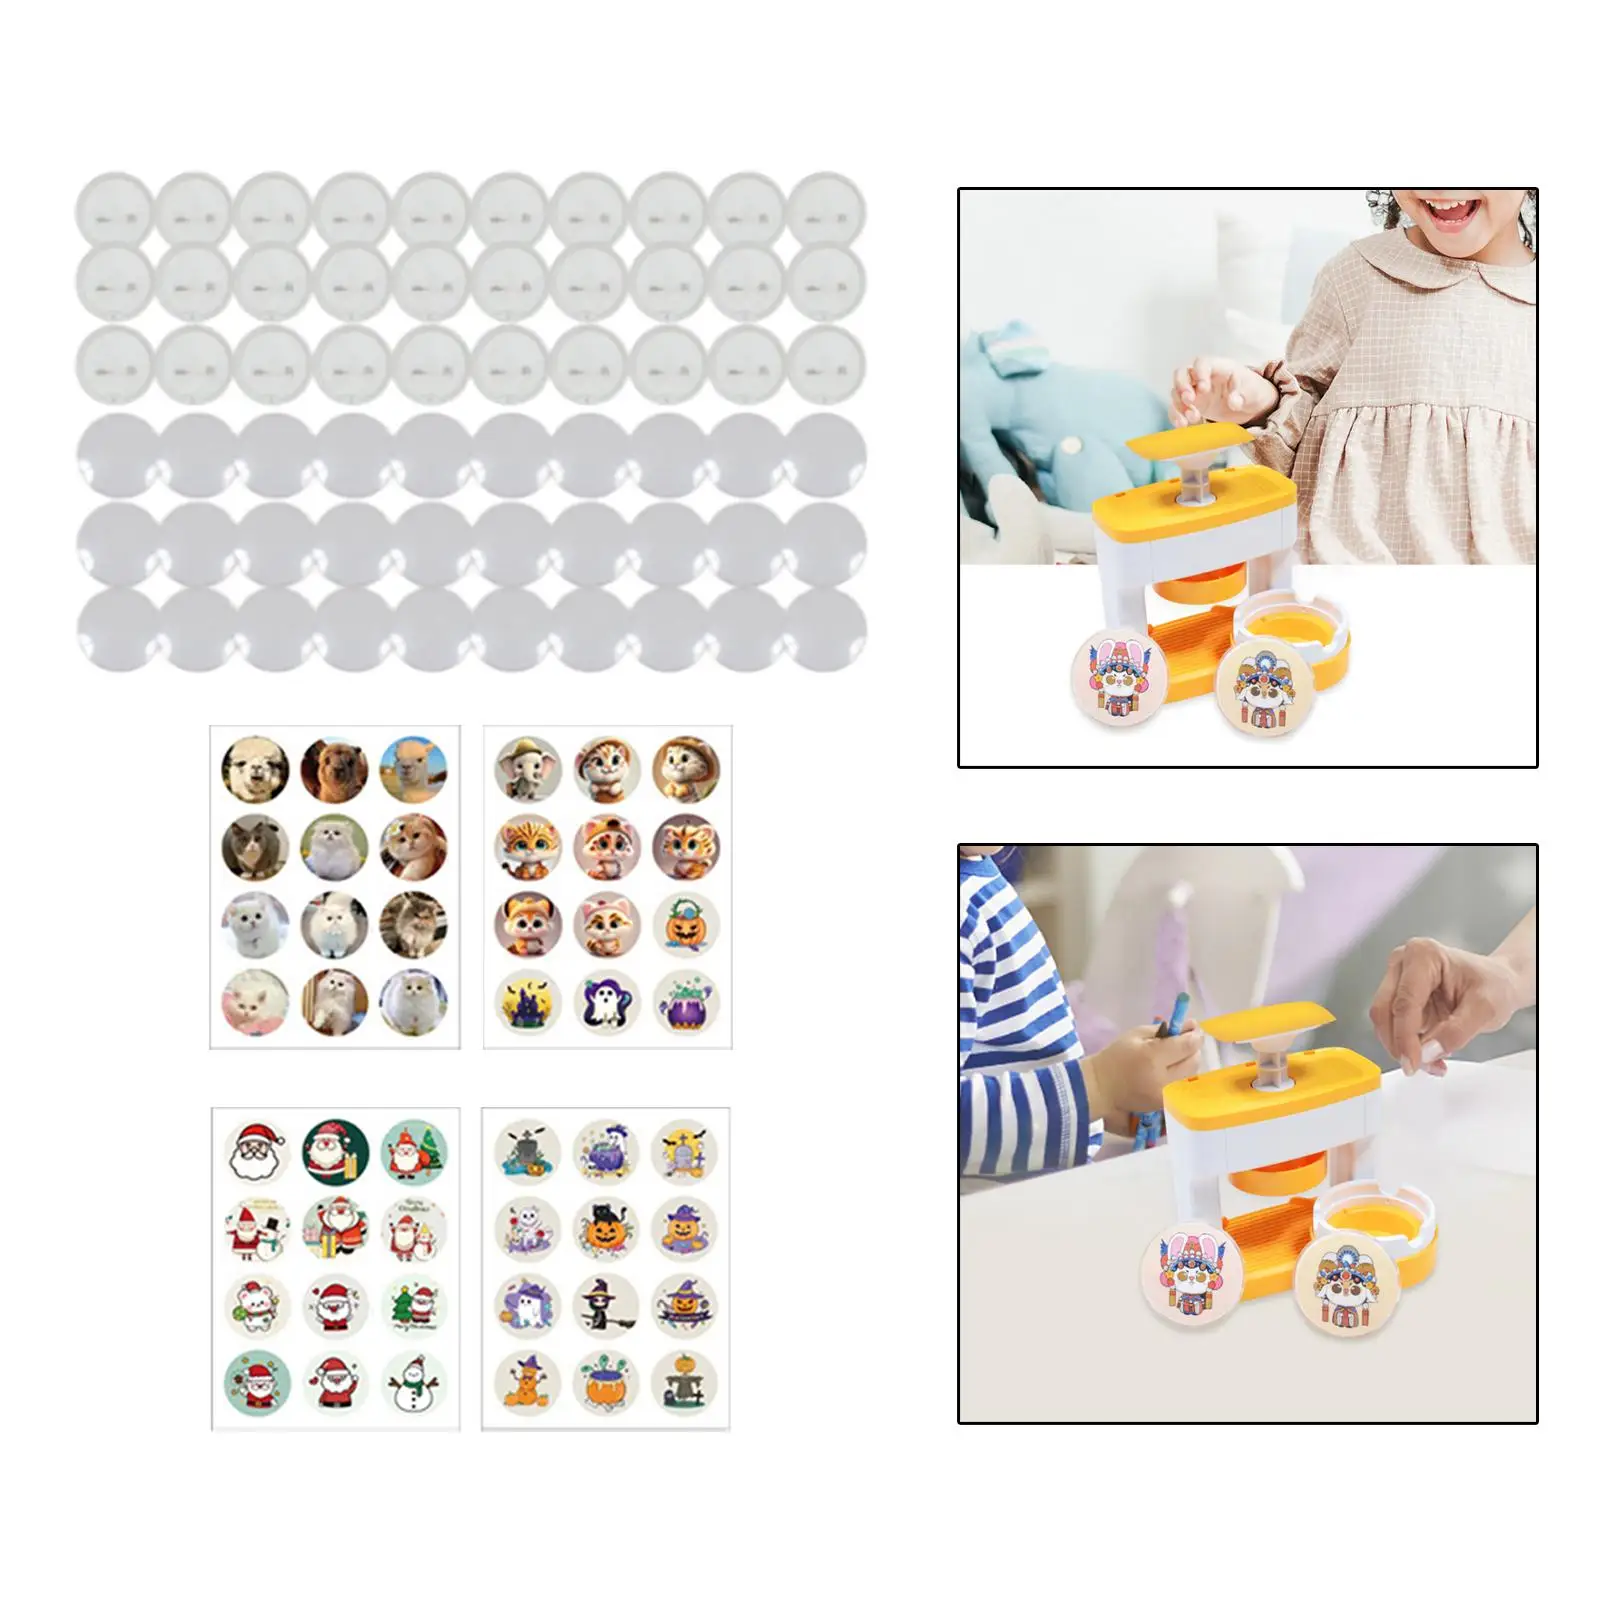 Button Badge Machine DIY Badges Set Pin Buttons Upgrade Portable Multiple Crafts for Boys Children Adults Teenagers Learning Toy